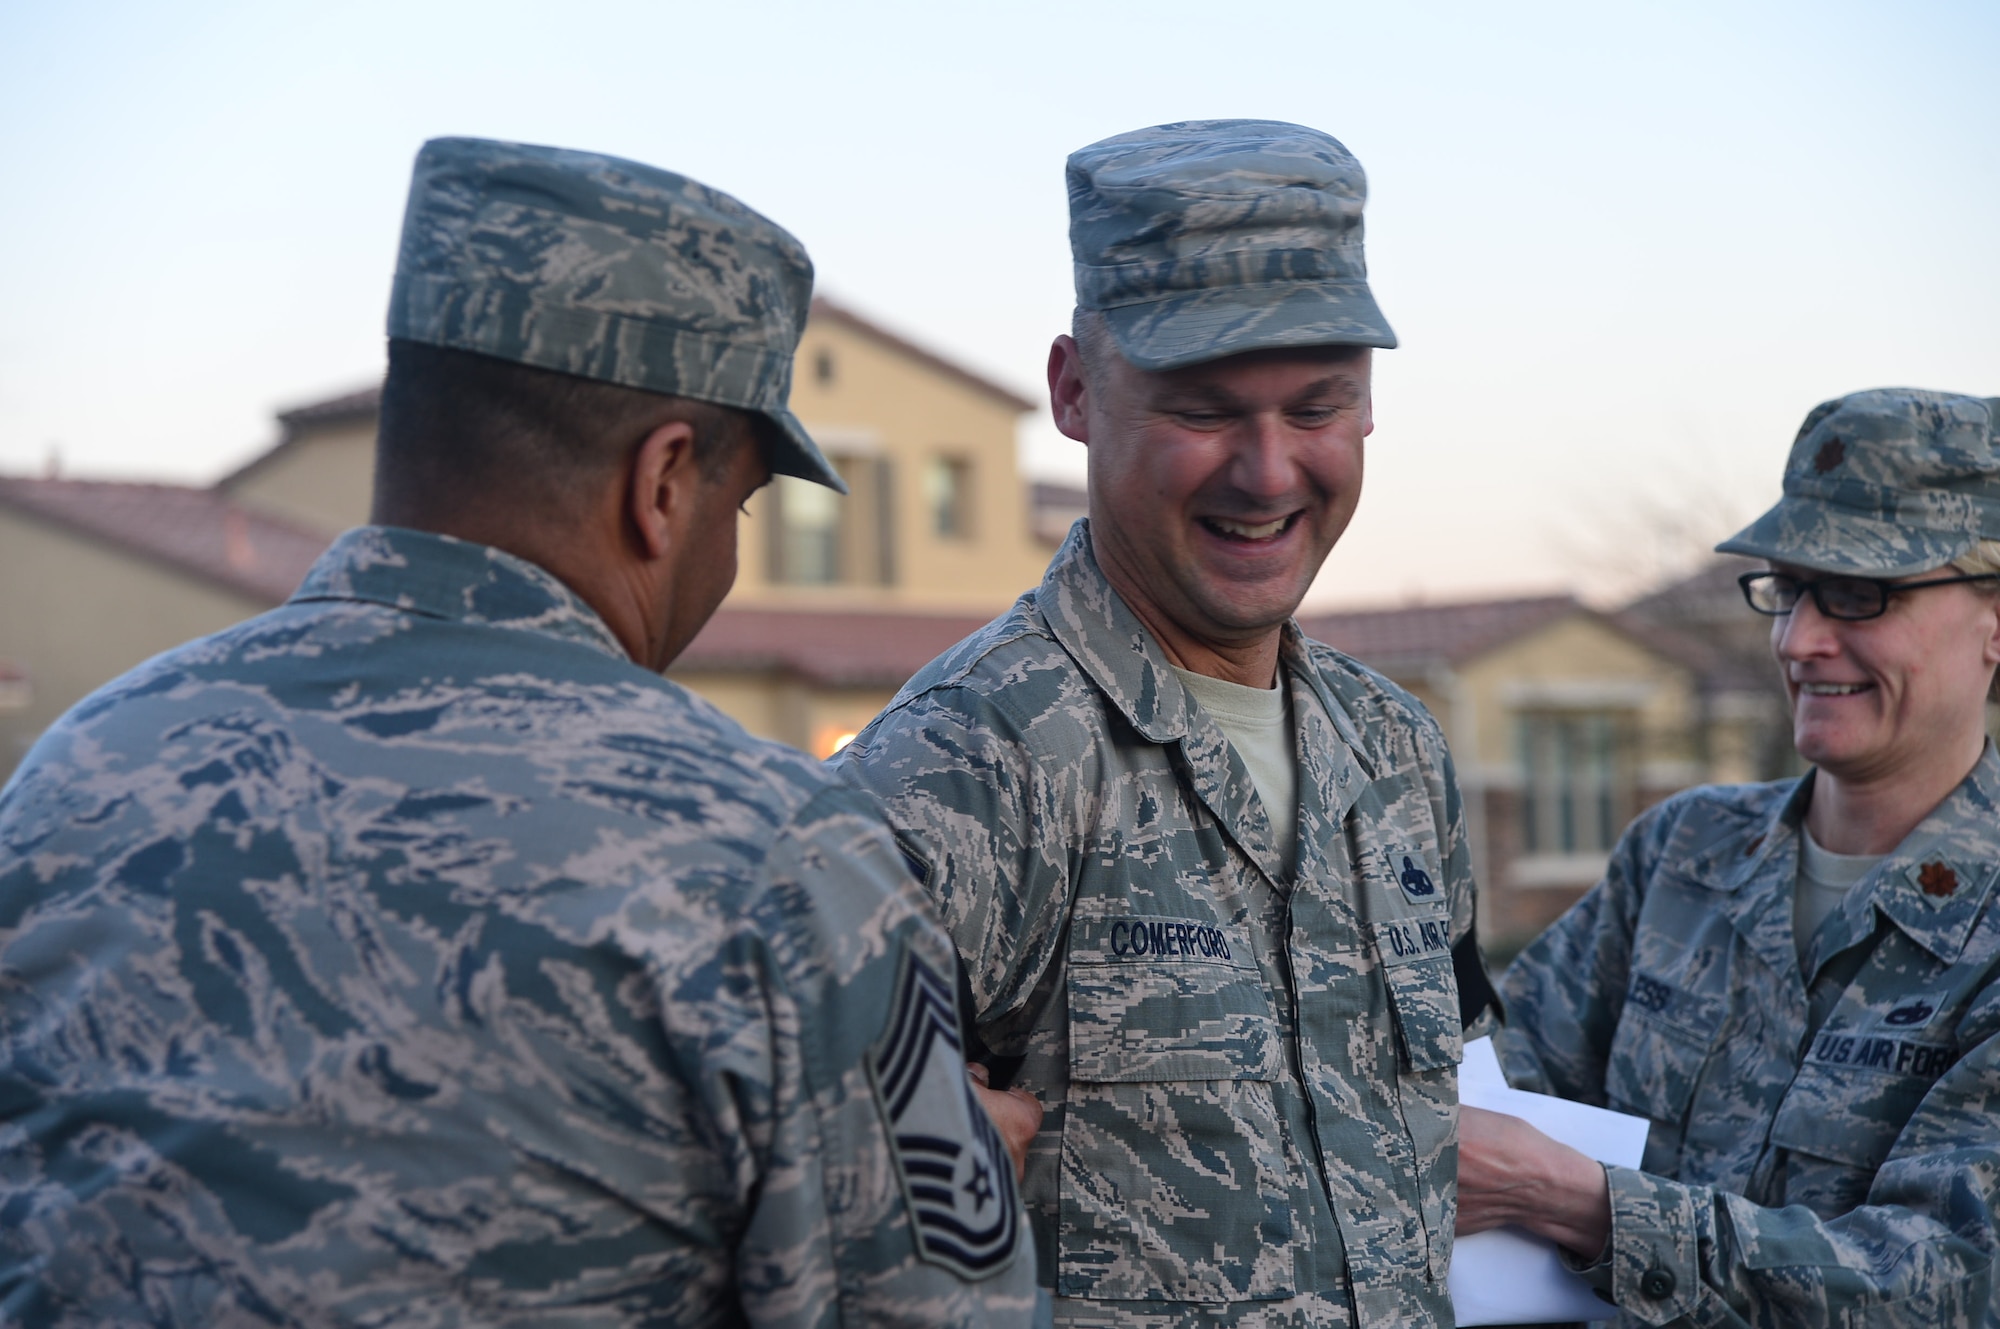 Chief Master Sgt. John, left, 432nd Maintenance Group and Maj. Seanna, 432nd Maintenance Squadron commander, pin on Master Sgt. Gordon, 432nd MXS accountable munitions systems officer, with his newly earned rank of senior master sergeant at his home.  Leadership from the 432nd Wing/432nd Air Expeditionary Wing made sure that Creech Air Force Base’s newest senior master sergeants and their families were personally recognized for their achievements with an unexpected visit at their home. (U.S. Air Force photo by Staff Sgt. N.B.)